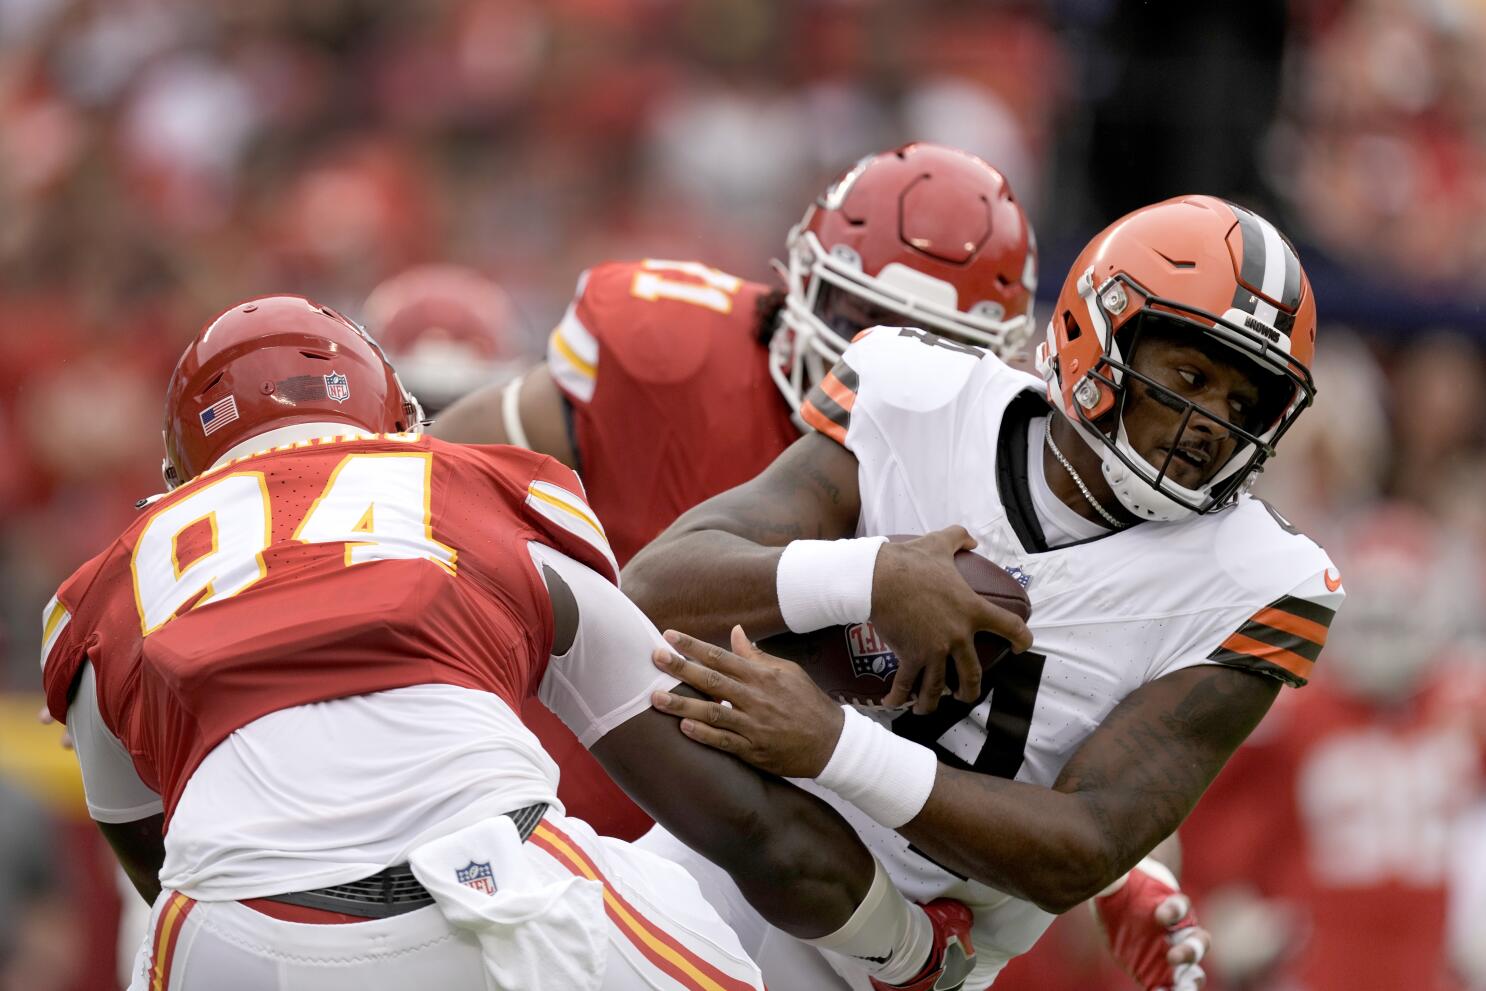 Watson, Burrow square off as Browns host Bengals in season opener